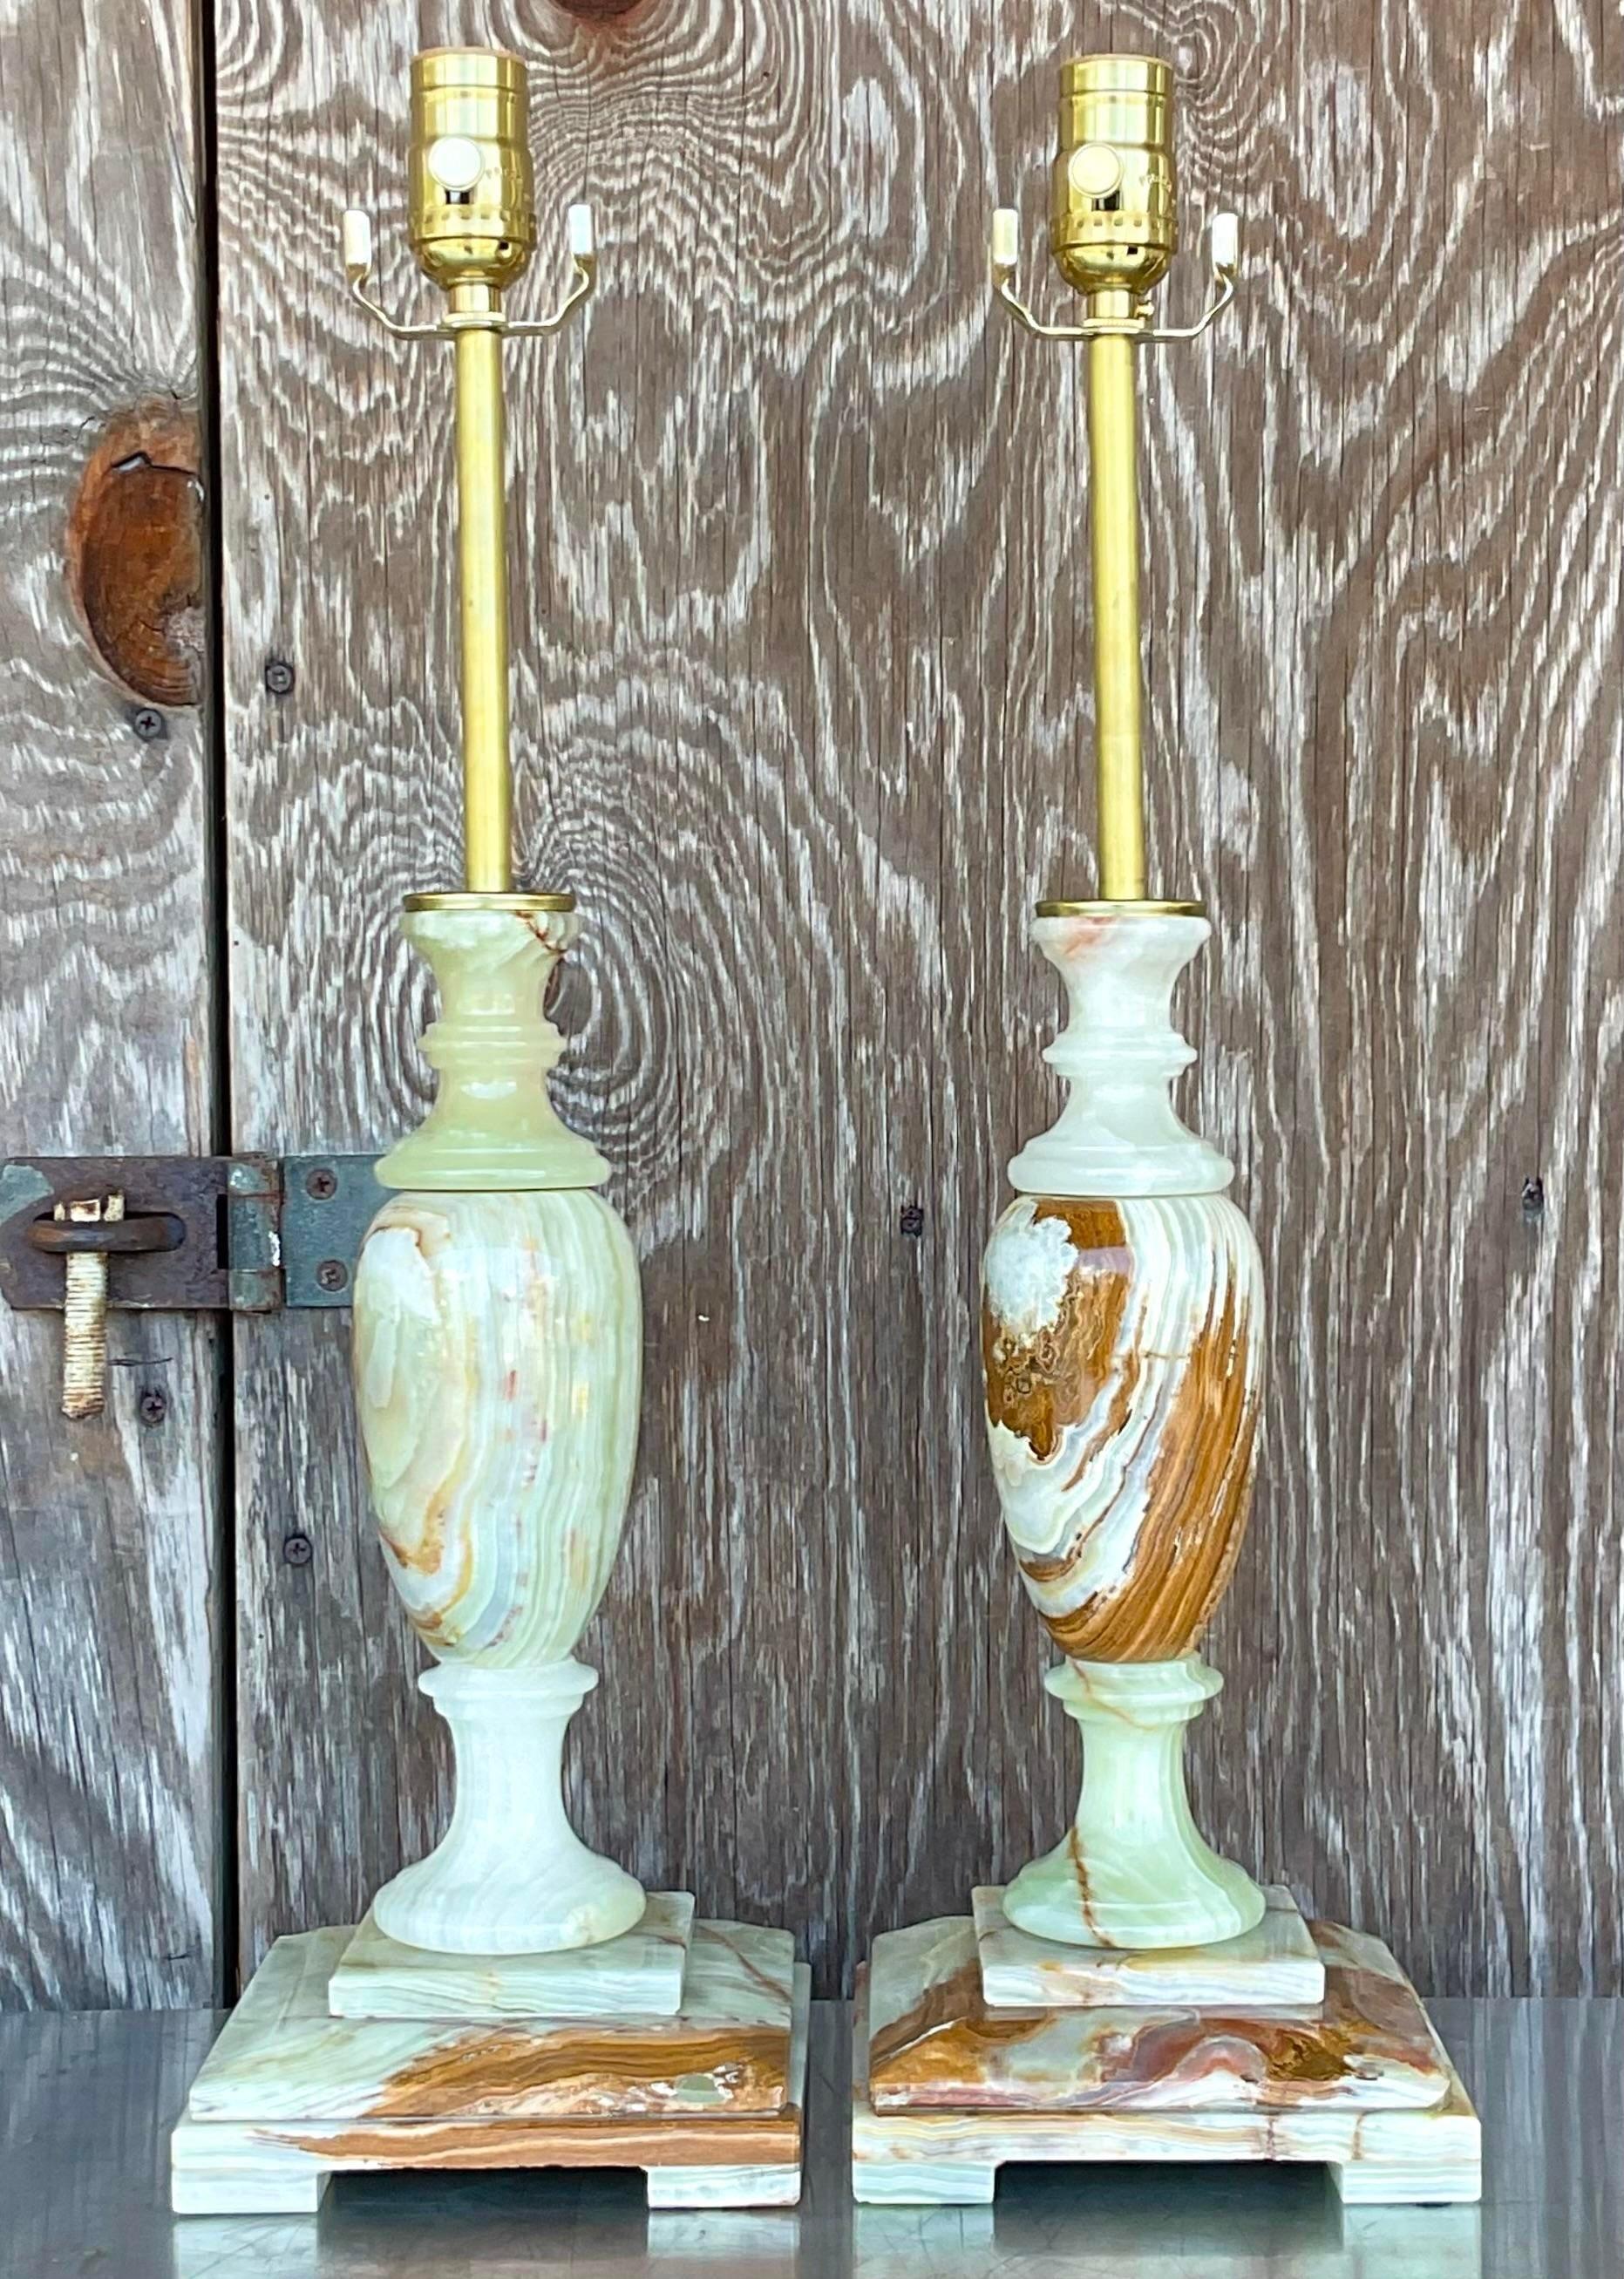 A fabulous pair of vintage Regency table lamps. Beautiful candlestick style in onyx. Incredible coloration and veining in the stone. Fully restored with all new wiring and hardware. Acquired from a Palm Beach estate.